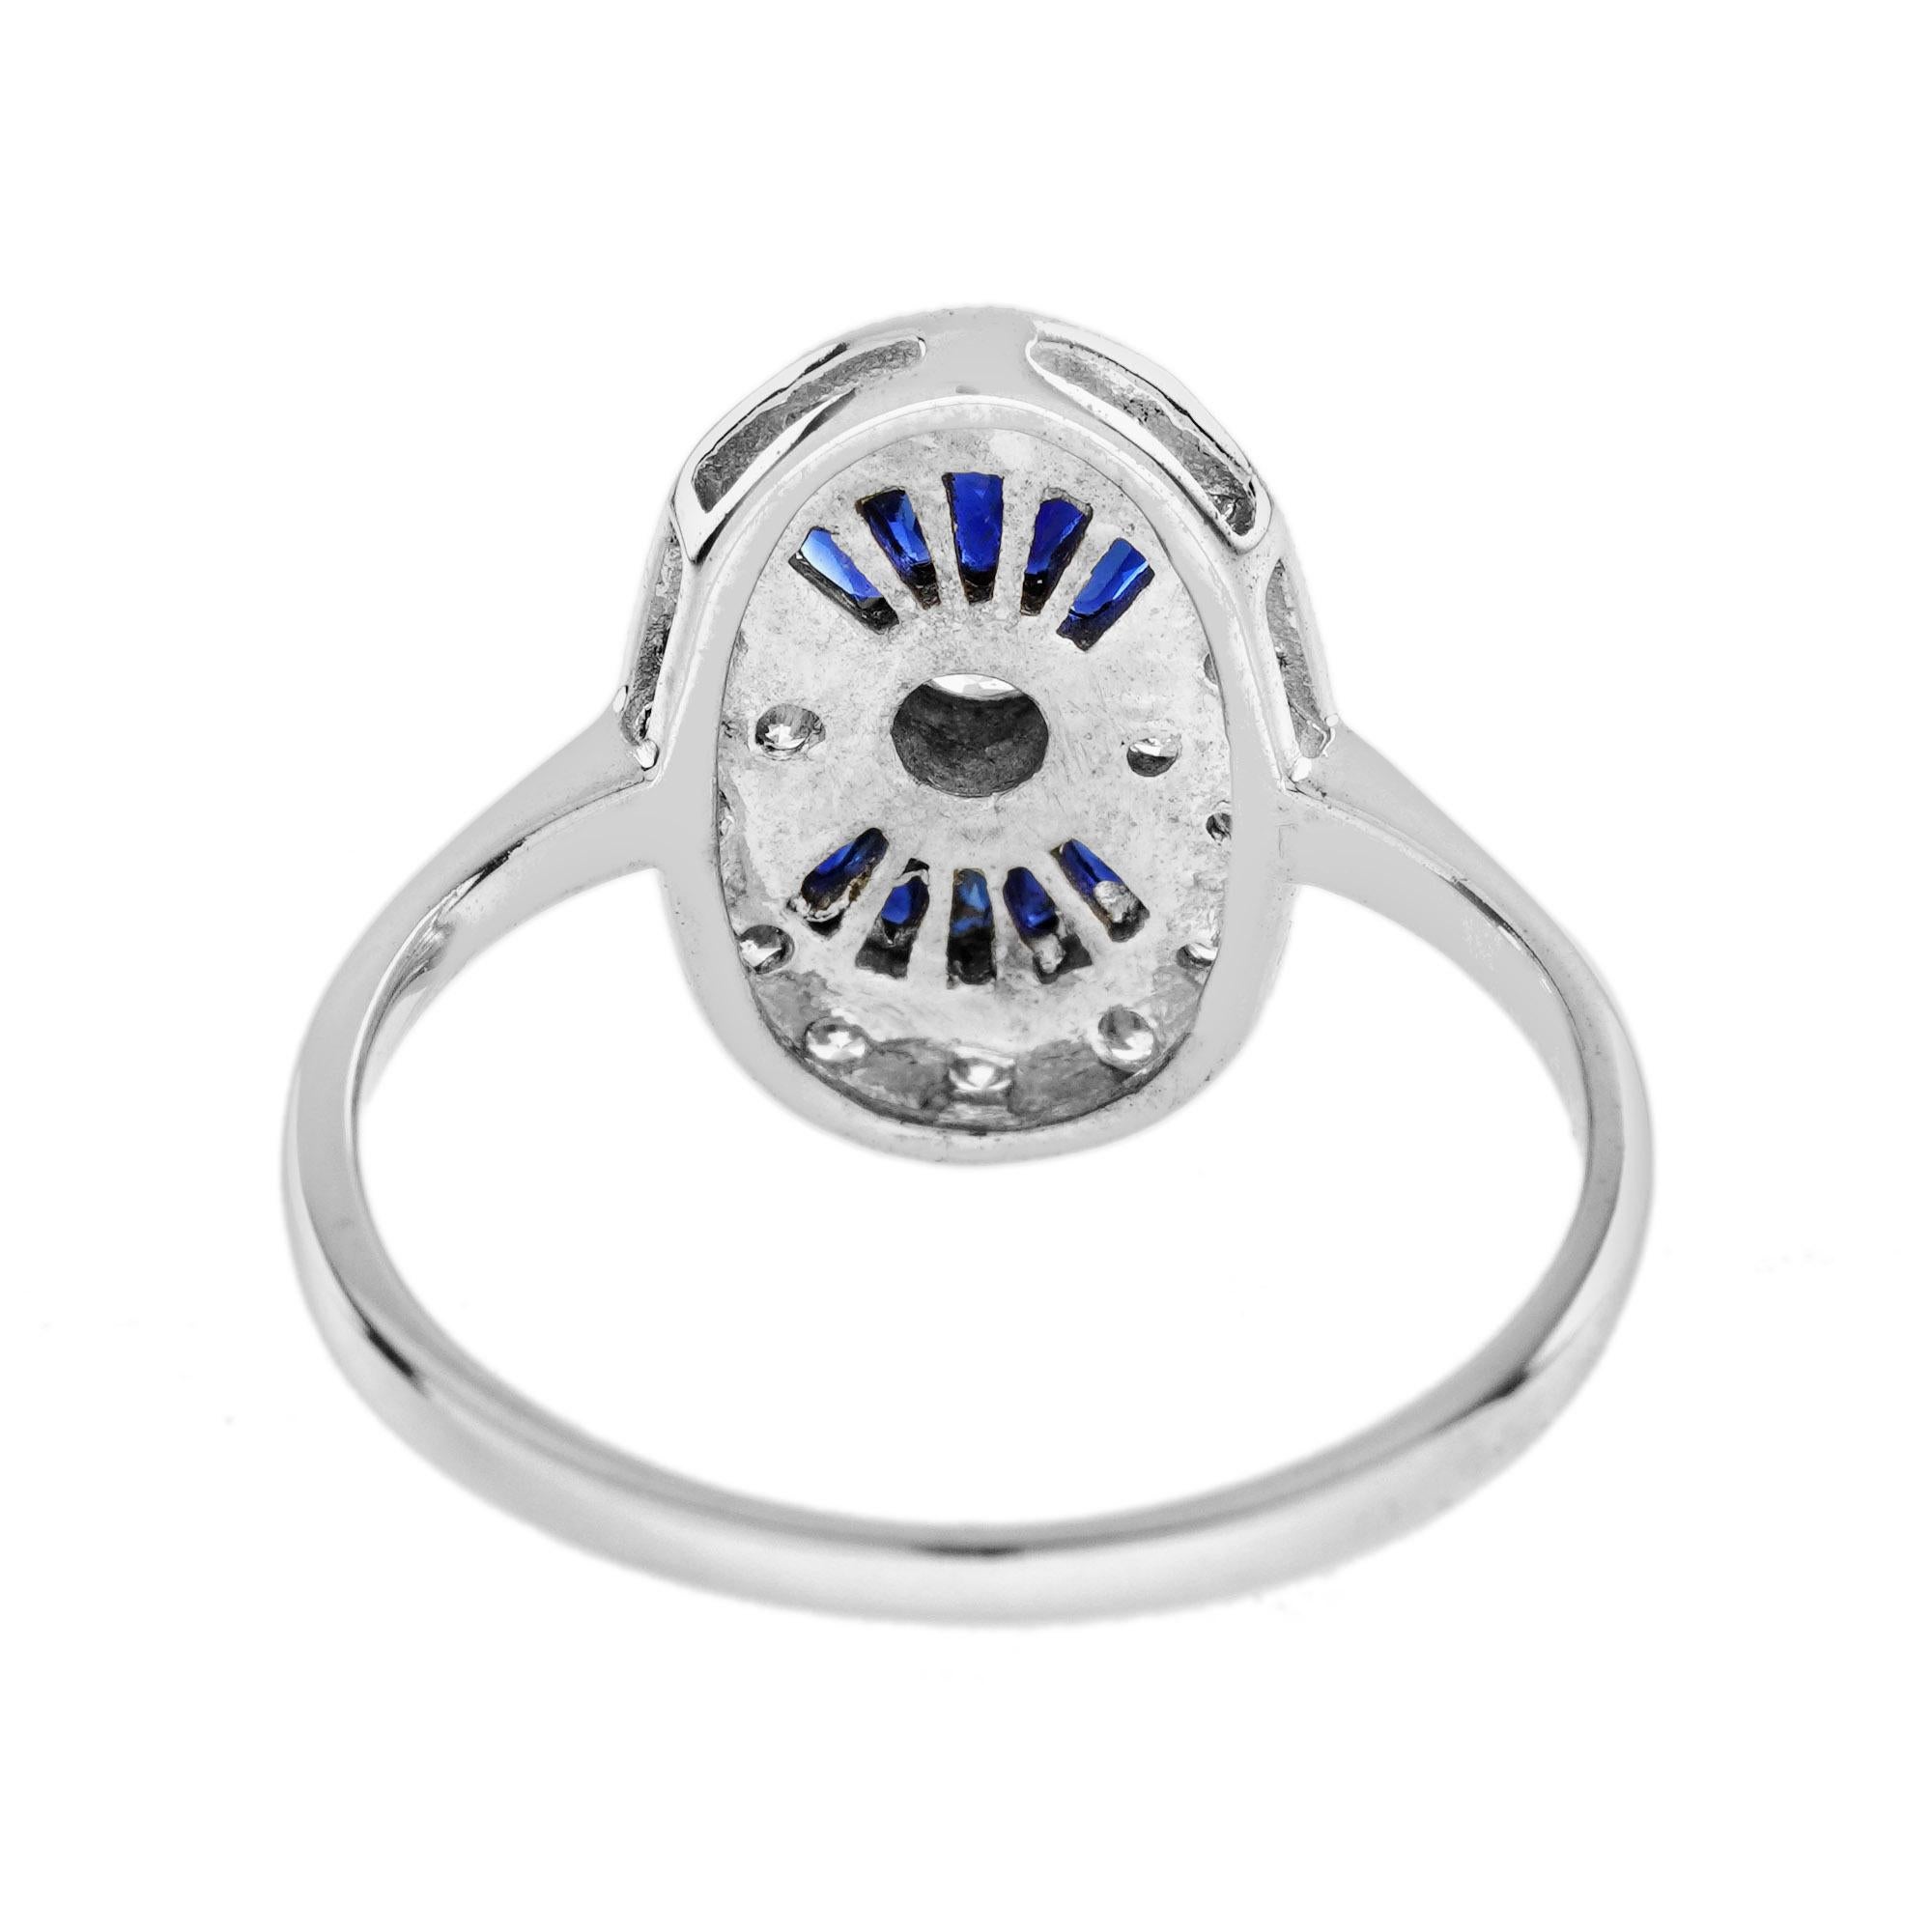 For Sale:  Diamond and Blue Sapphire Art Deco Style Oval Shaped Ring in 14K White Gold 5